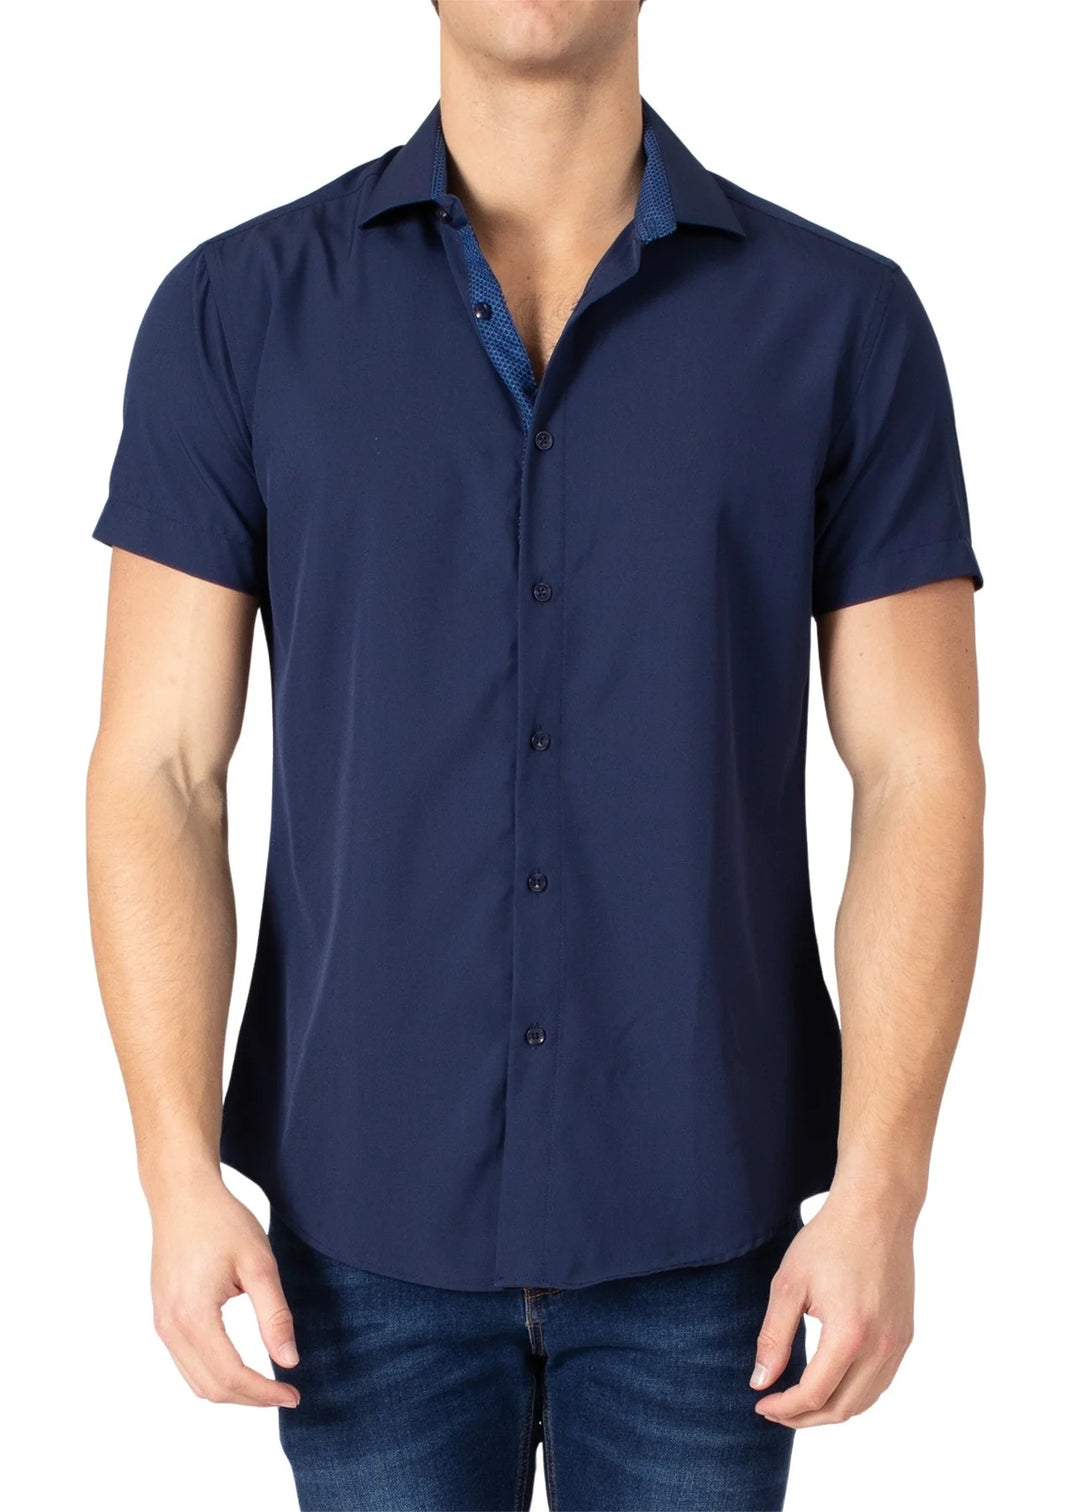 Bespoke Collection Stretch Fabric Button Up Short Sleeve Shirt - Navy